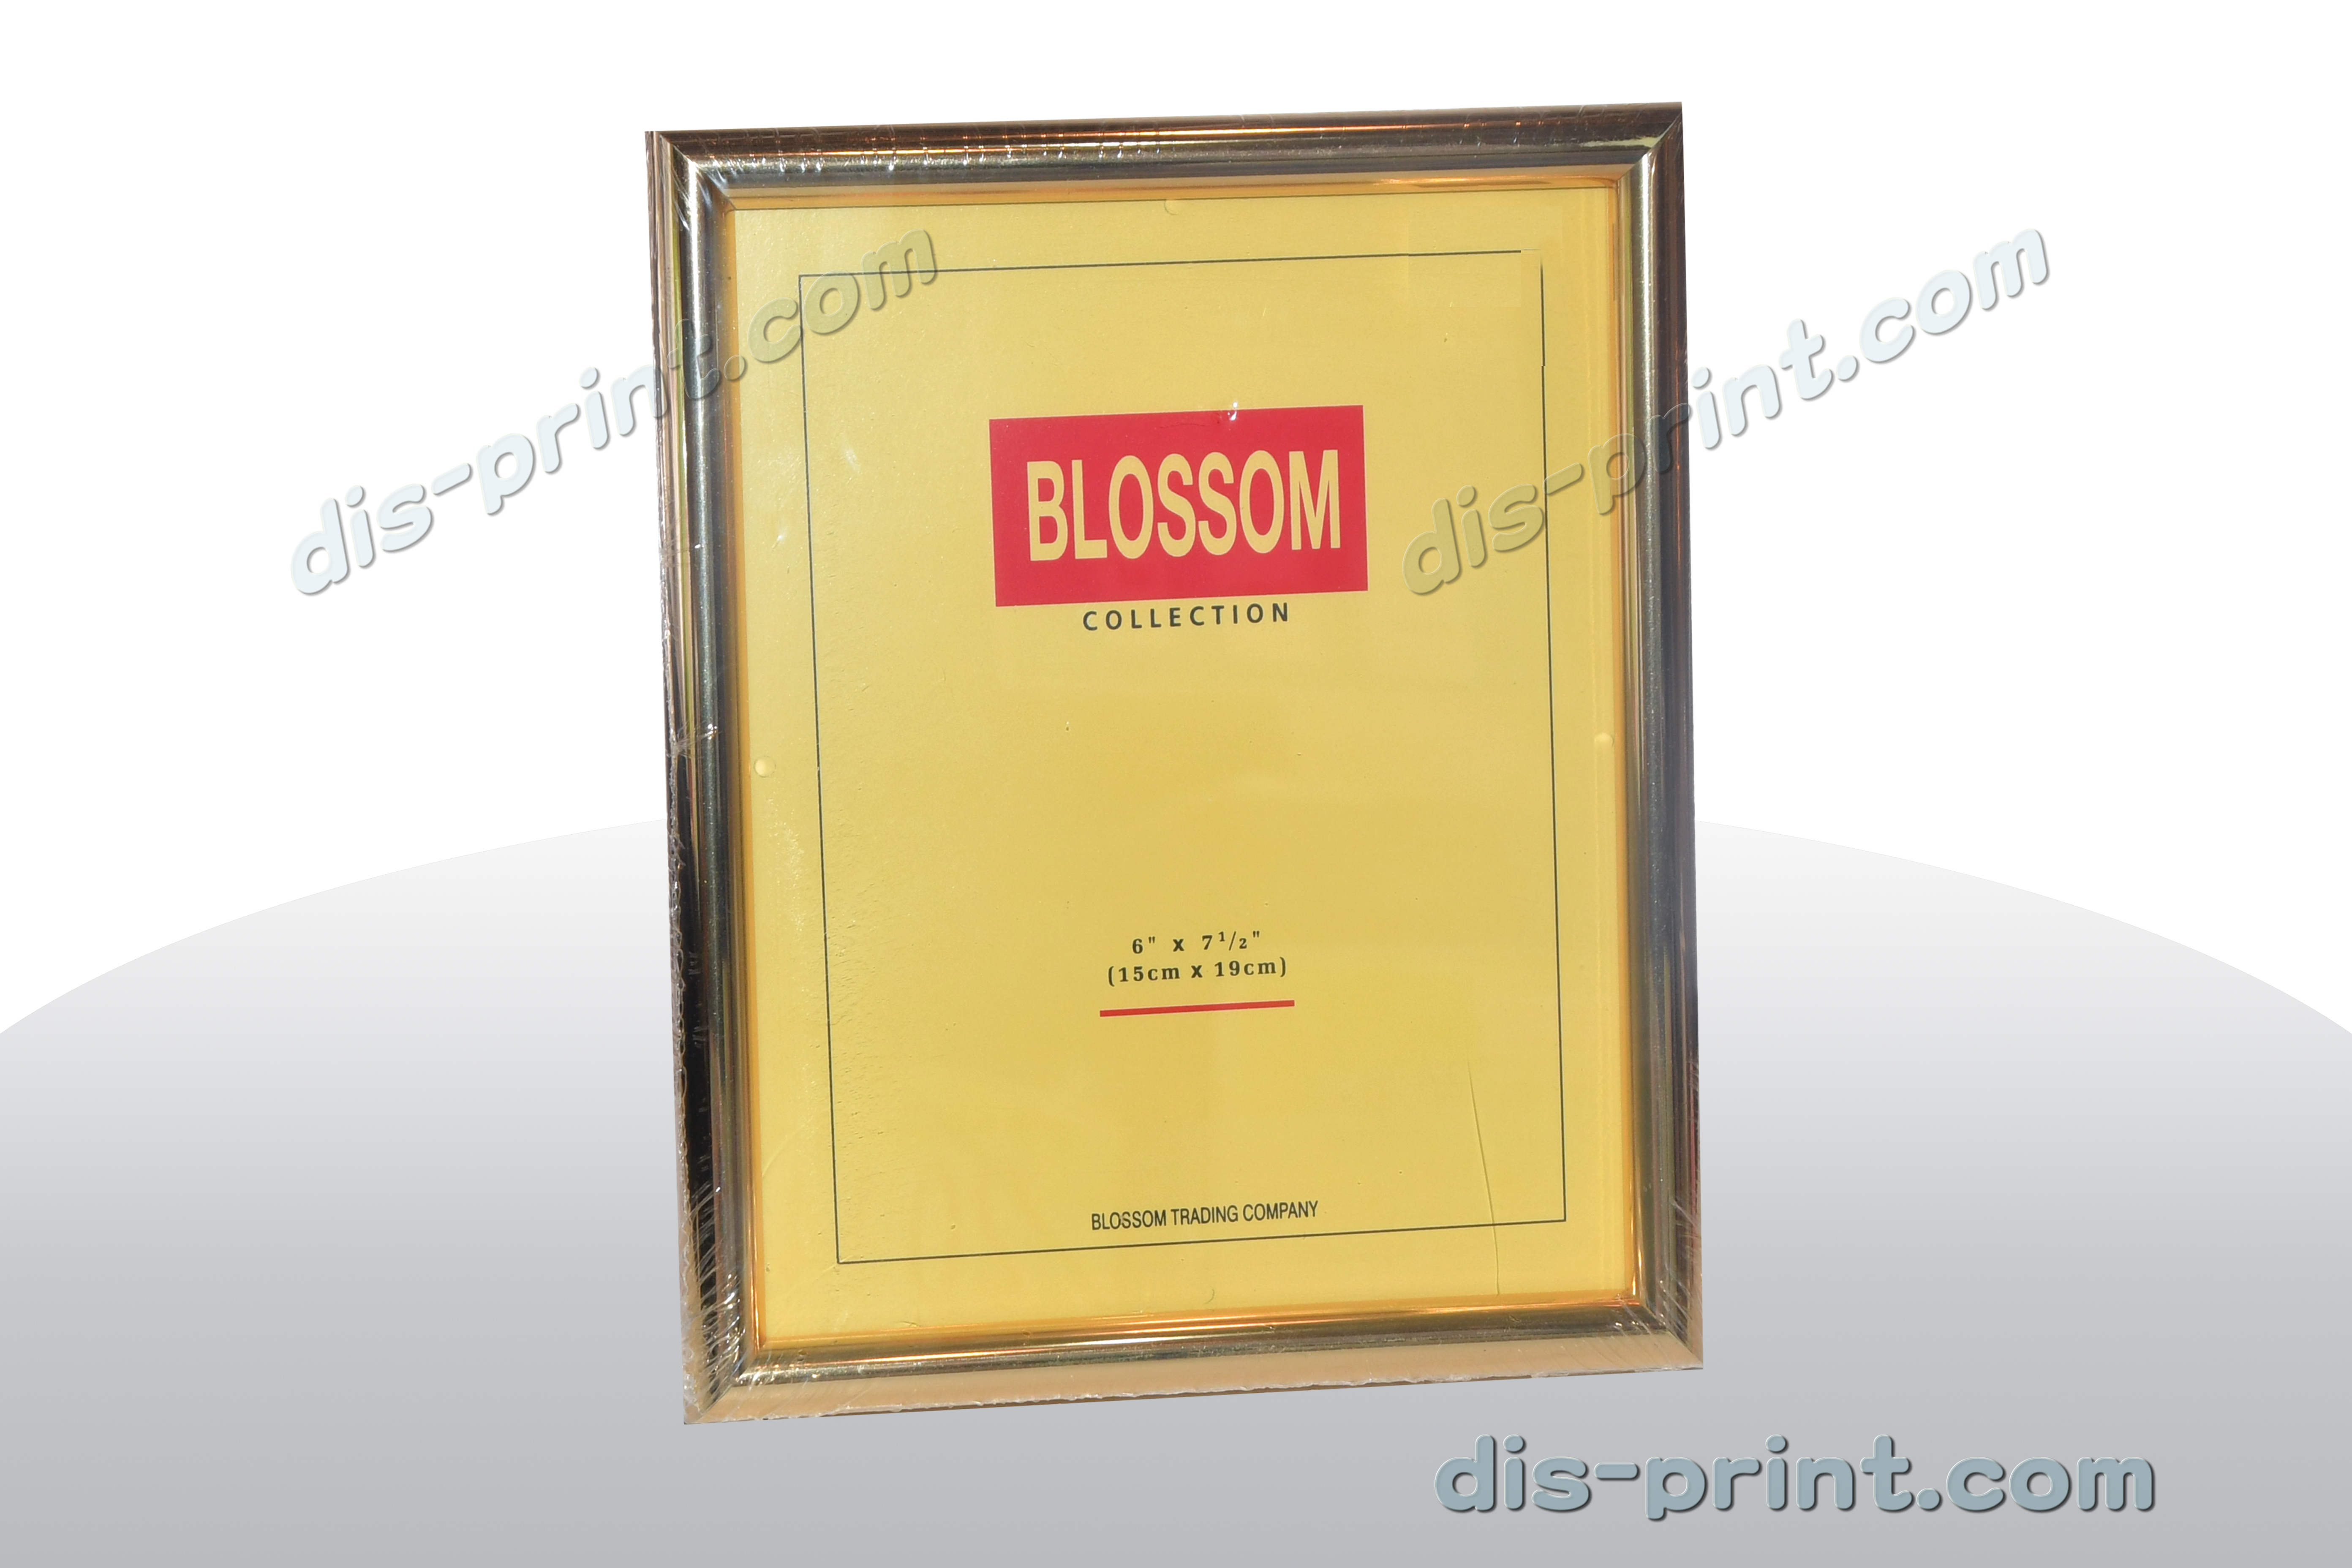  Gold/Silver Business Registration Certificate Photo Frame (glass surface)BP